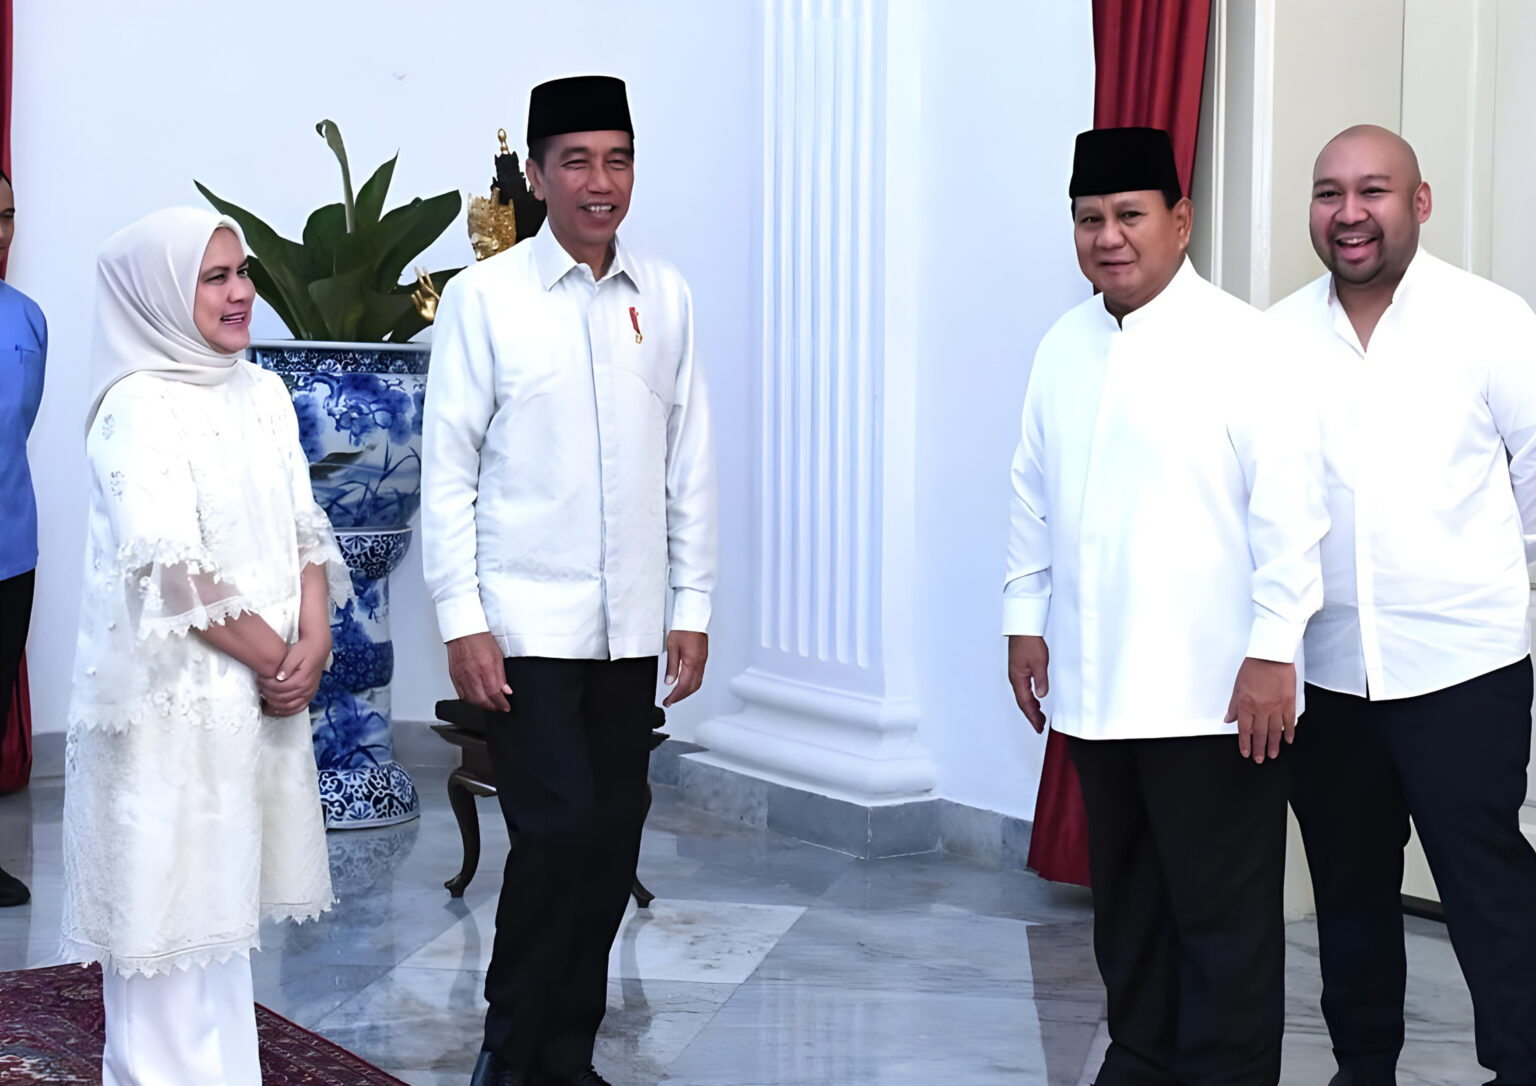 Prabowo Subianto Embarks on Eid Visits, Meeting with Key Figures Including President Jokowi and Others